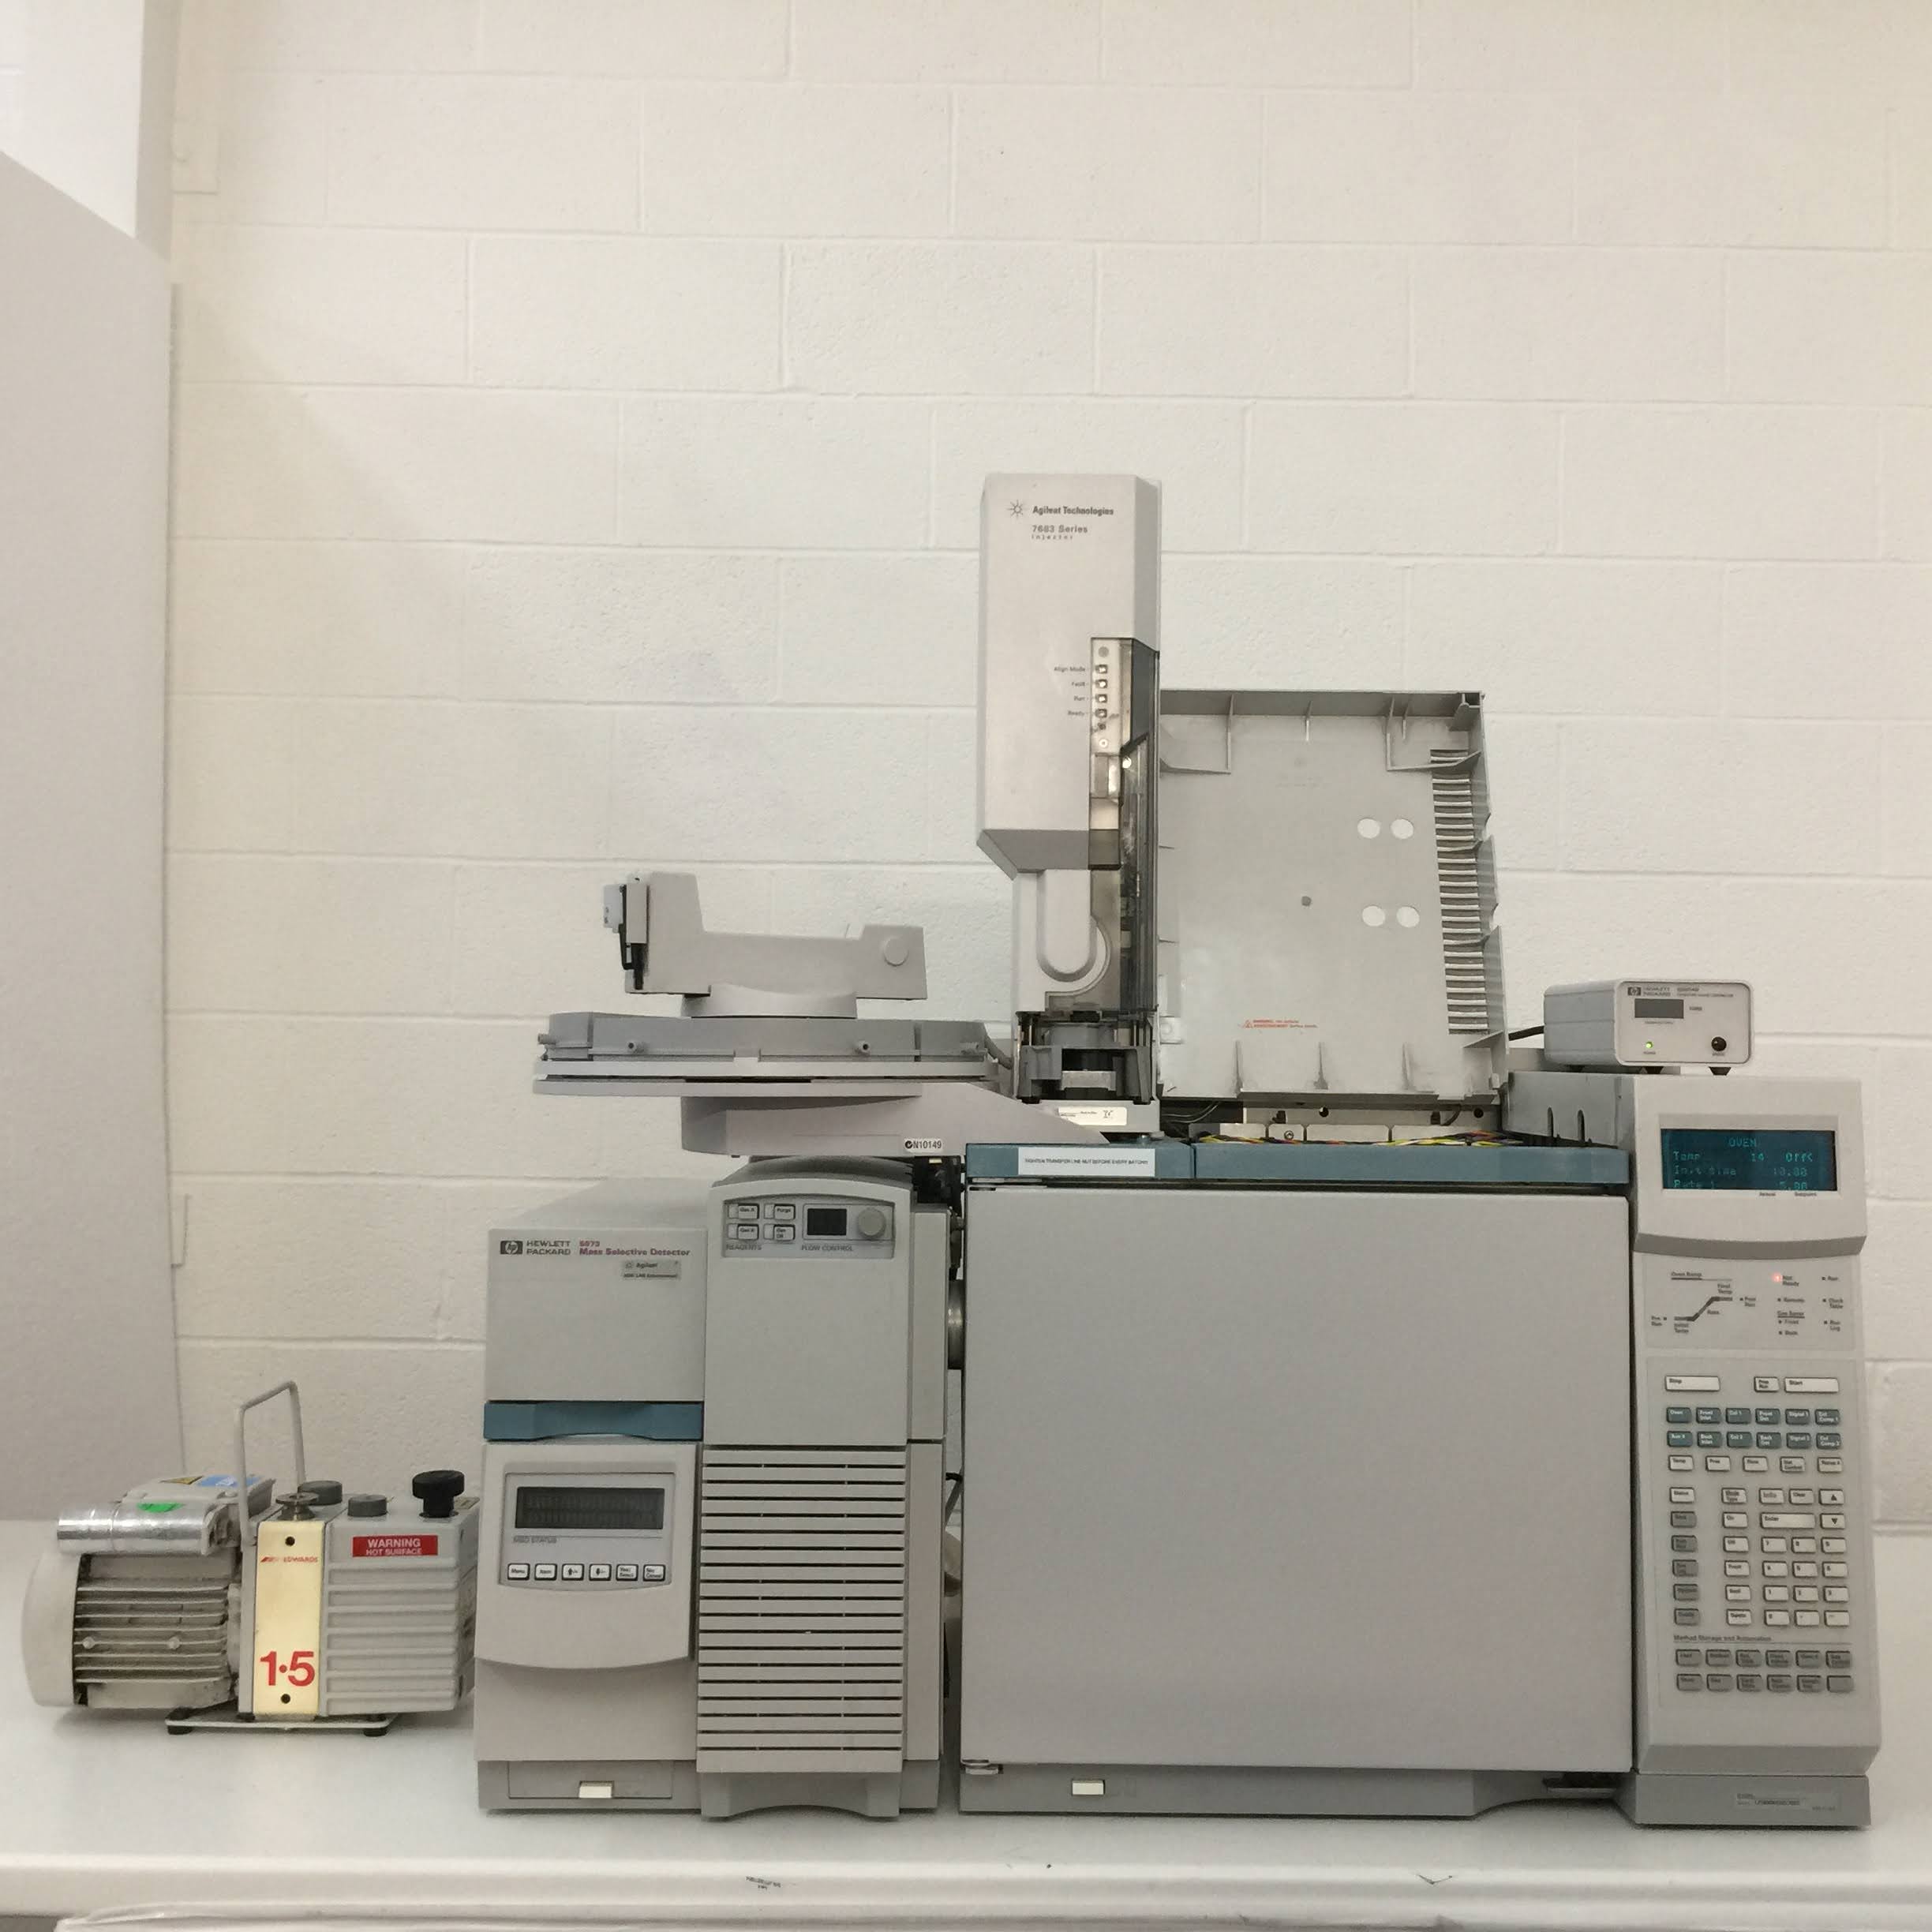 78%OFF!】 DIRWINGSショップ DW USED 8日保証 セット HP Agilent 6890 7683 G2613A G1530A  GC System Gas Chromatograph ガスクロマトグラフ ST04013-0035